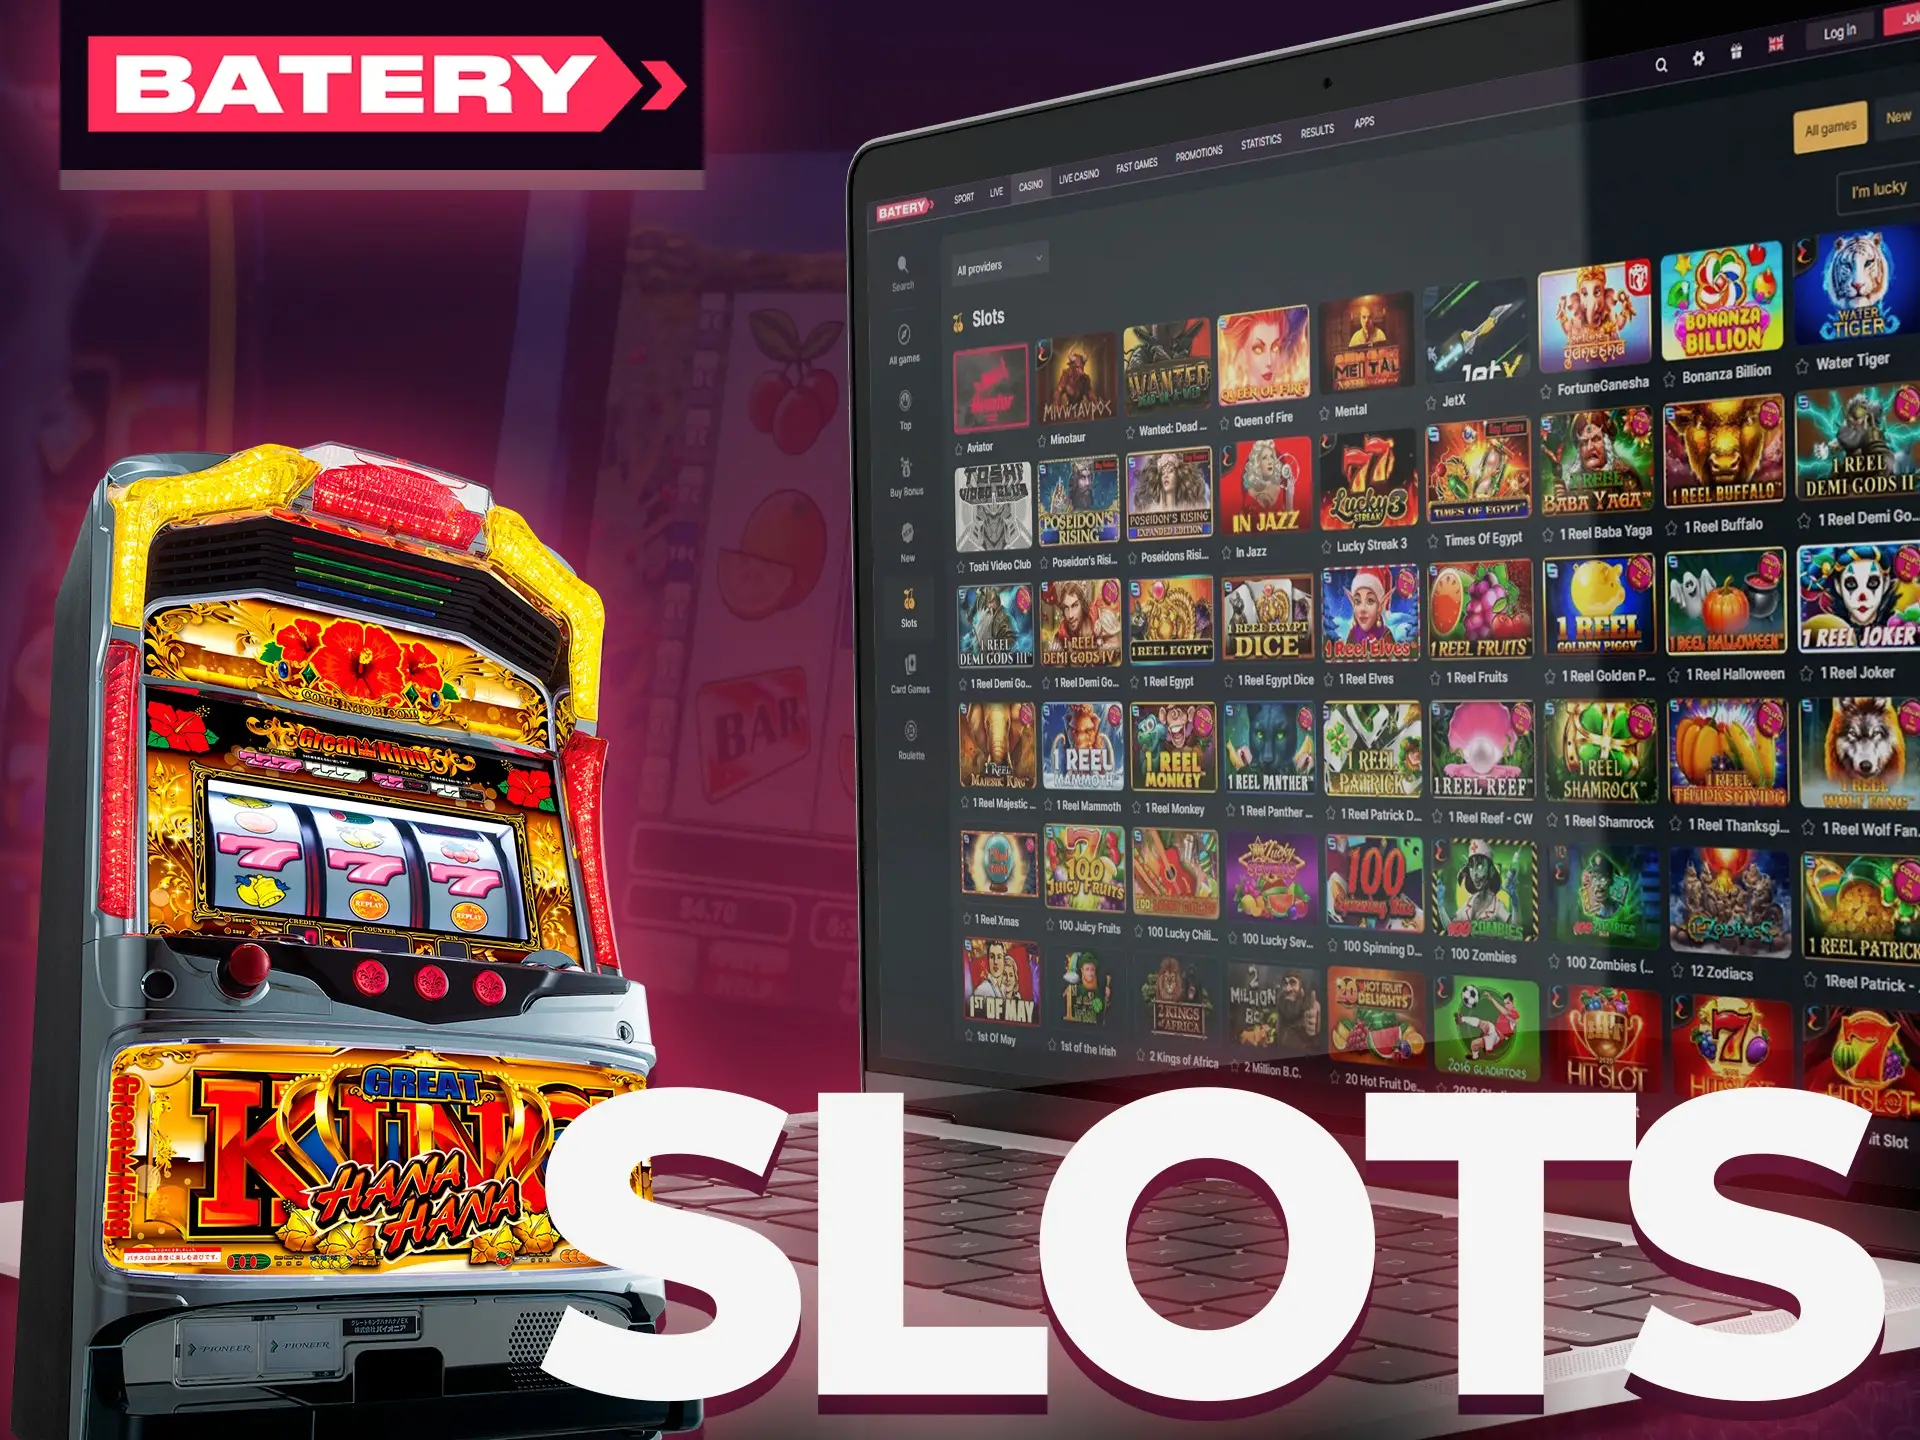 Search for your favourite slot games on Batery slots page.